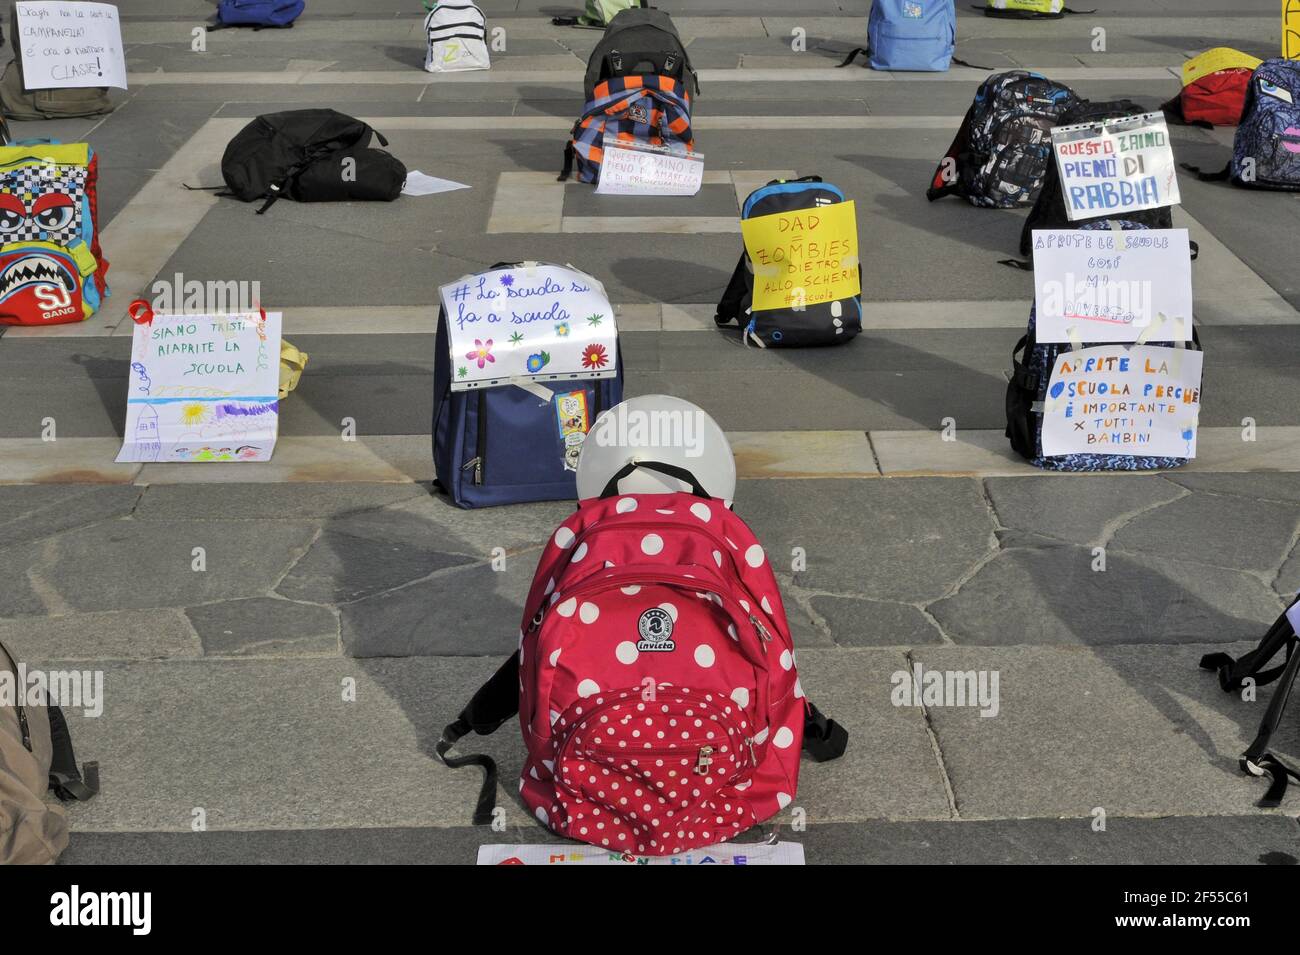 Milan, March 21, 2021, demonstration organized by the network Scuola In Presenza (School in Presence) to demand reopening of schools and the end of DaD, Distance Learning, adopted by the government to contain the epidemic of Covid19 virus Stock Photo